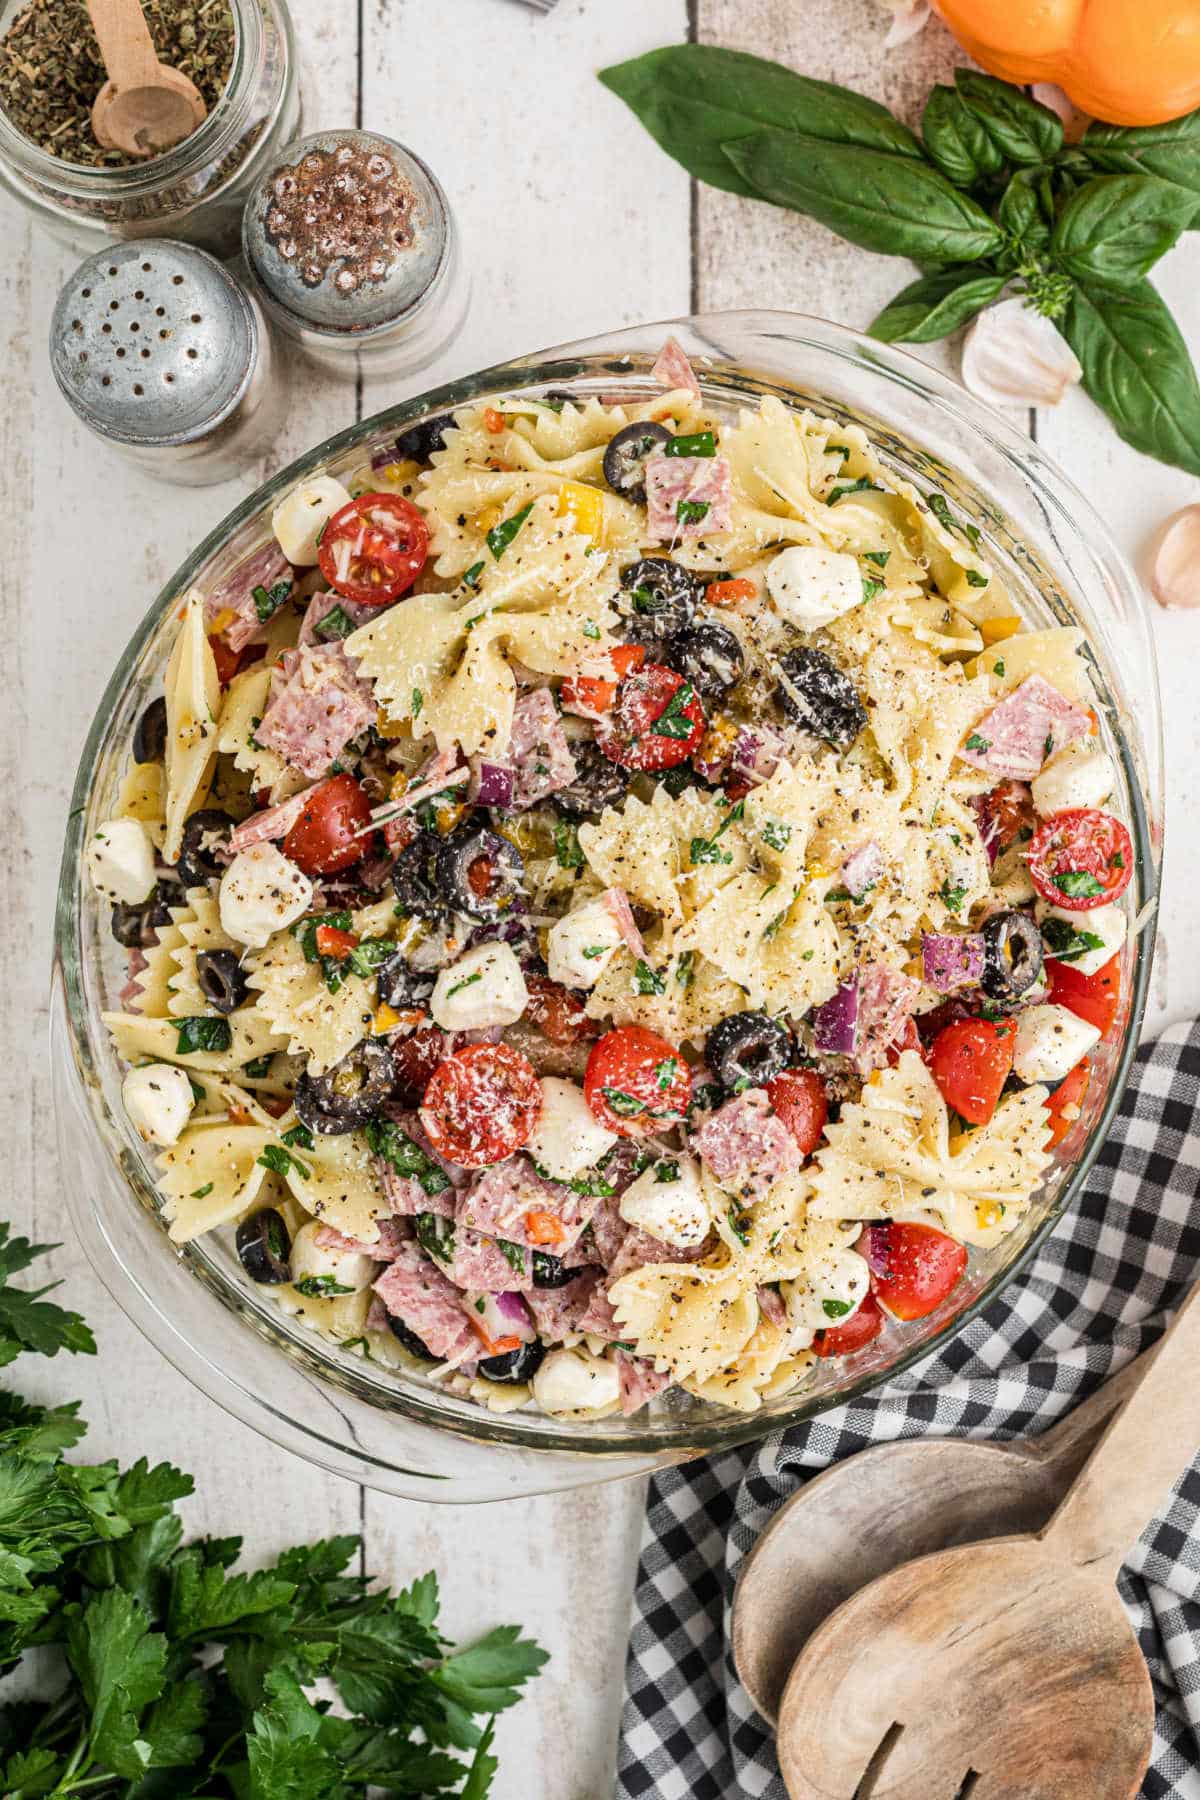 An overhead image of a bowl of Italian pasta salad, that has bowtie pasta, olives, feta cheese, tomatoes etc.